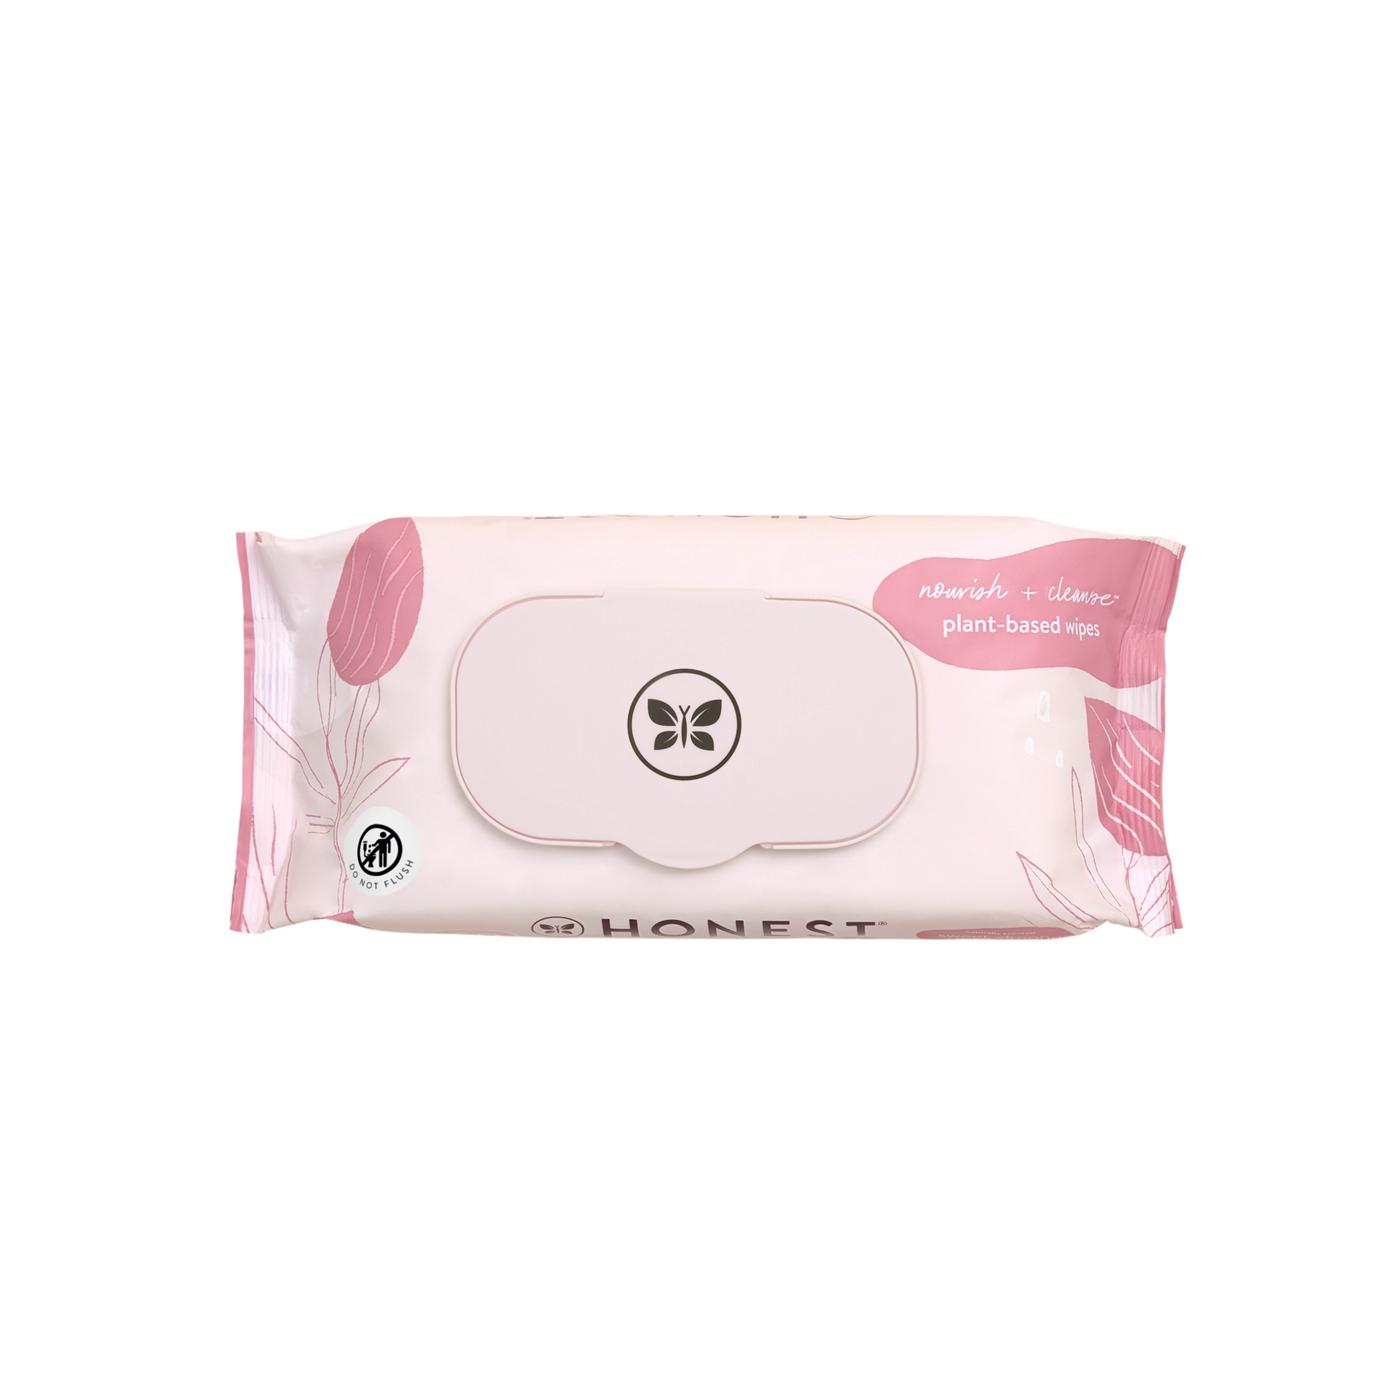 The Honest Company Nourish & Cleanse Baby Wipes; image 1 of 4